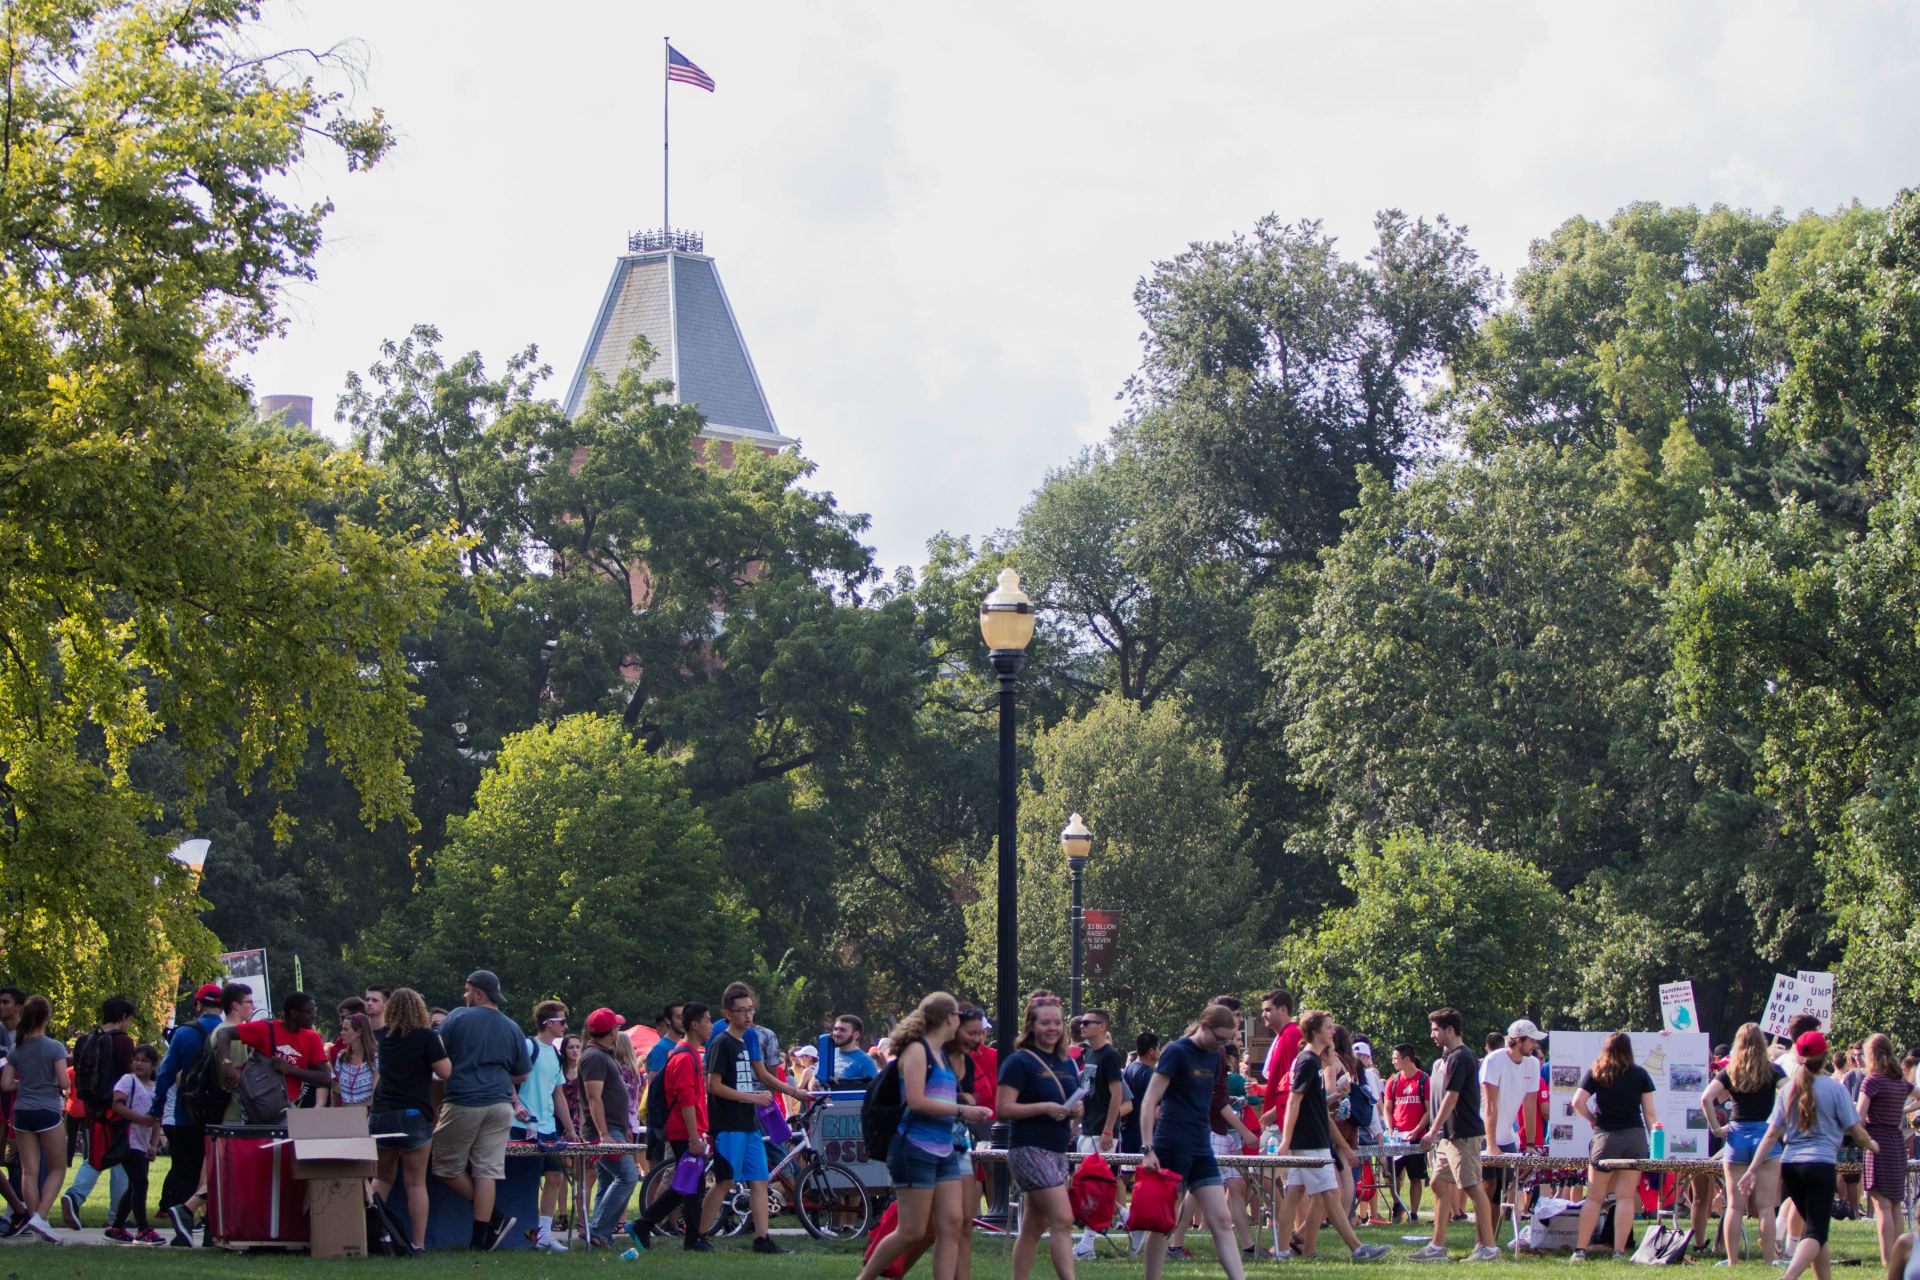 The student Involvement Fair takes place on The Oval every year during Welcome Week.